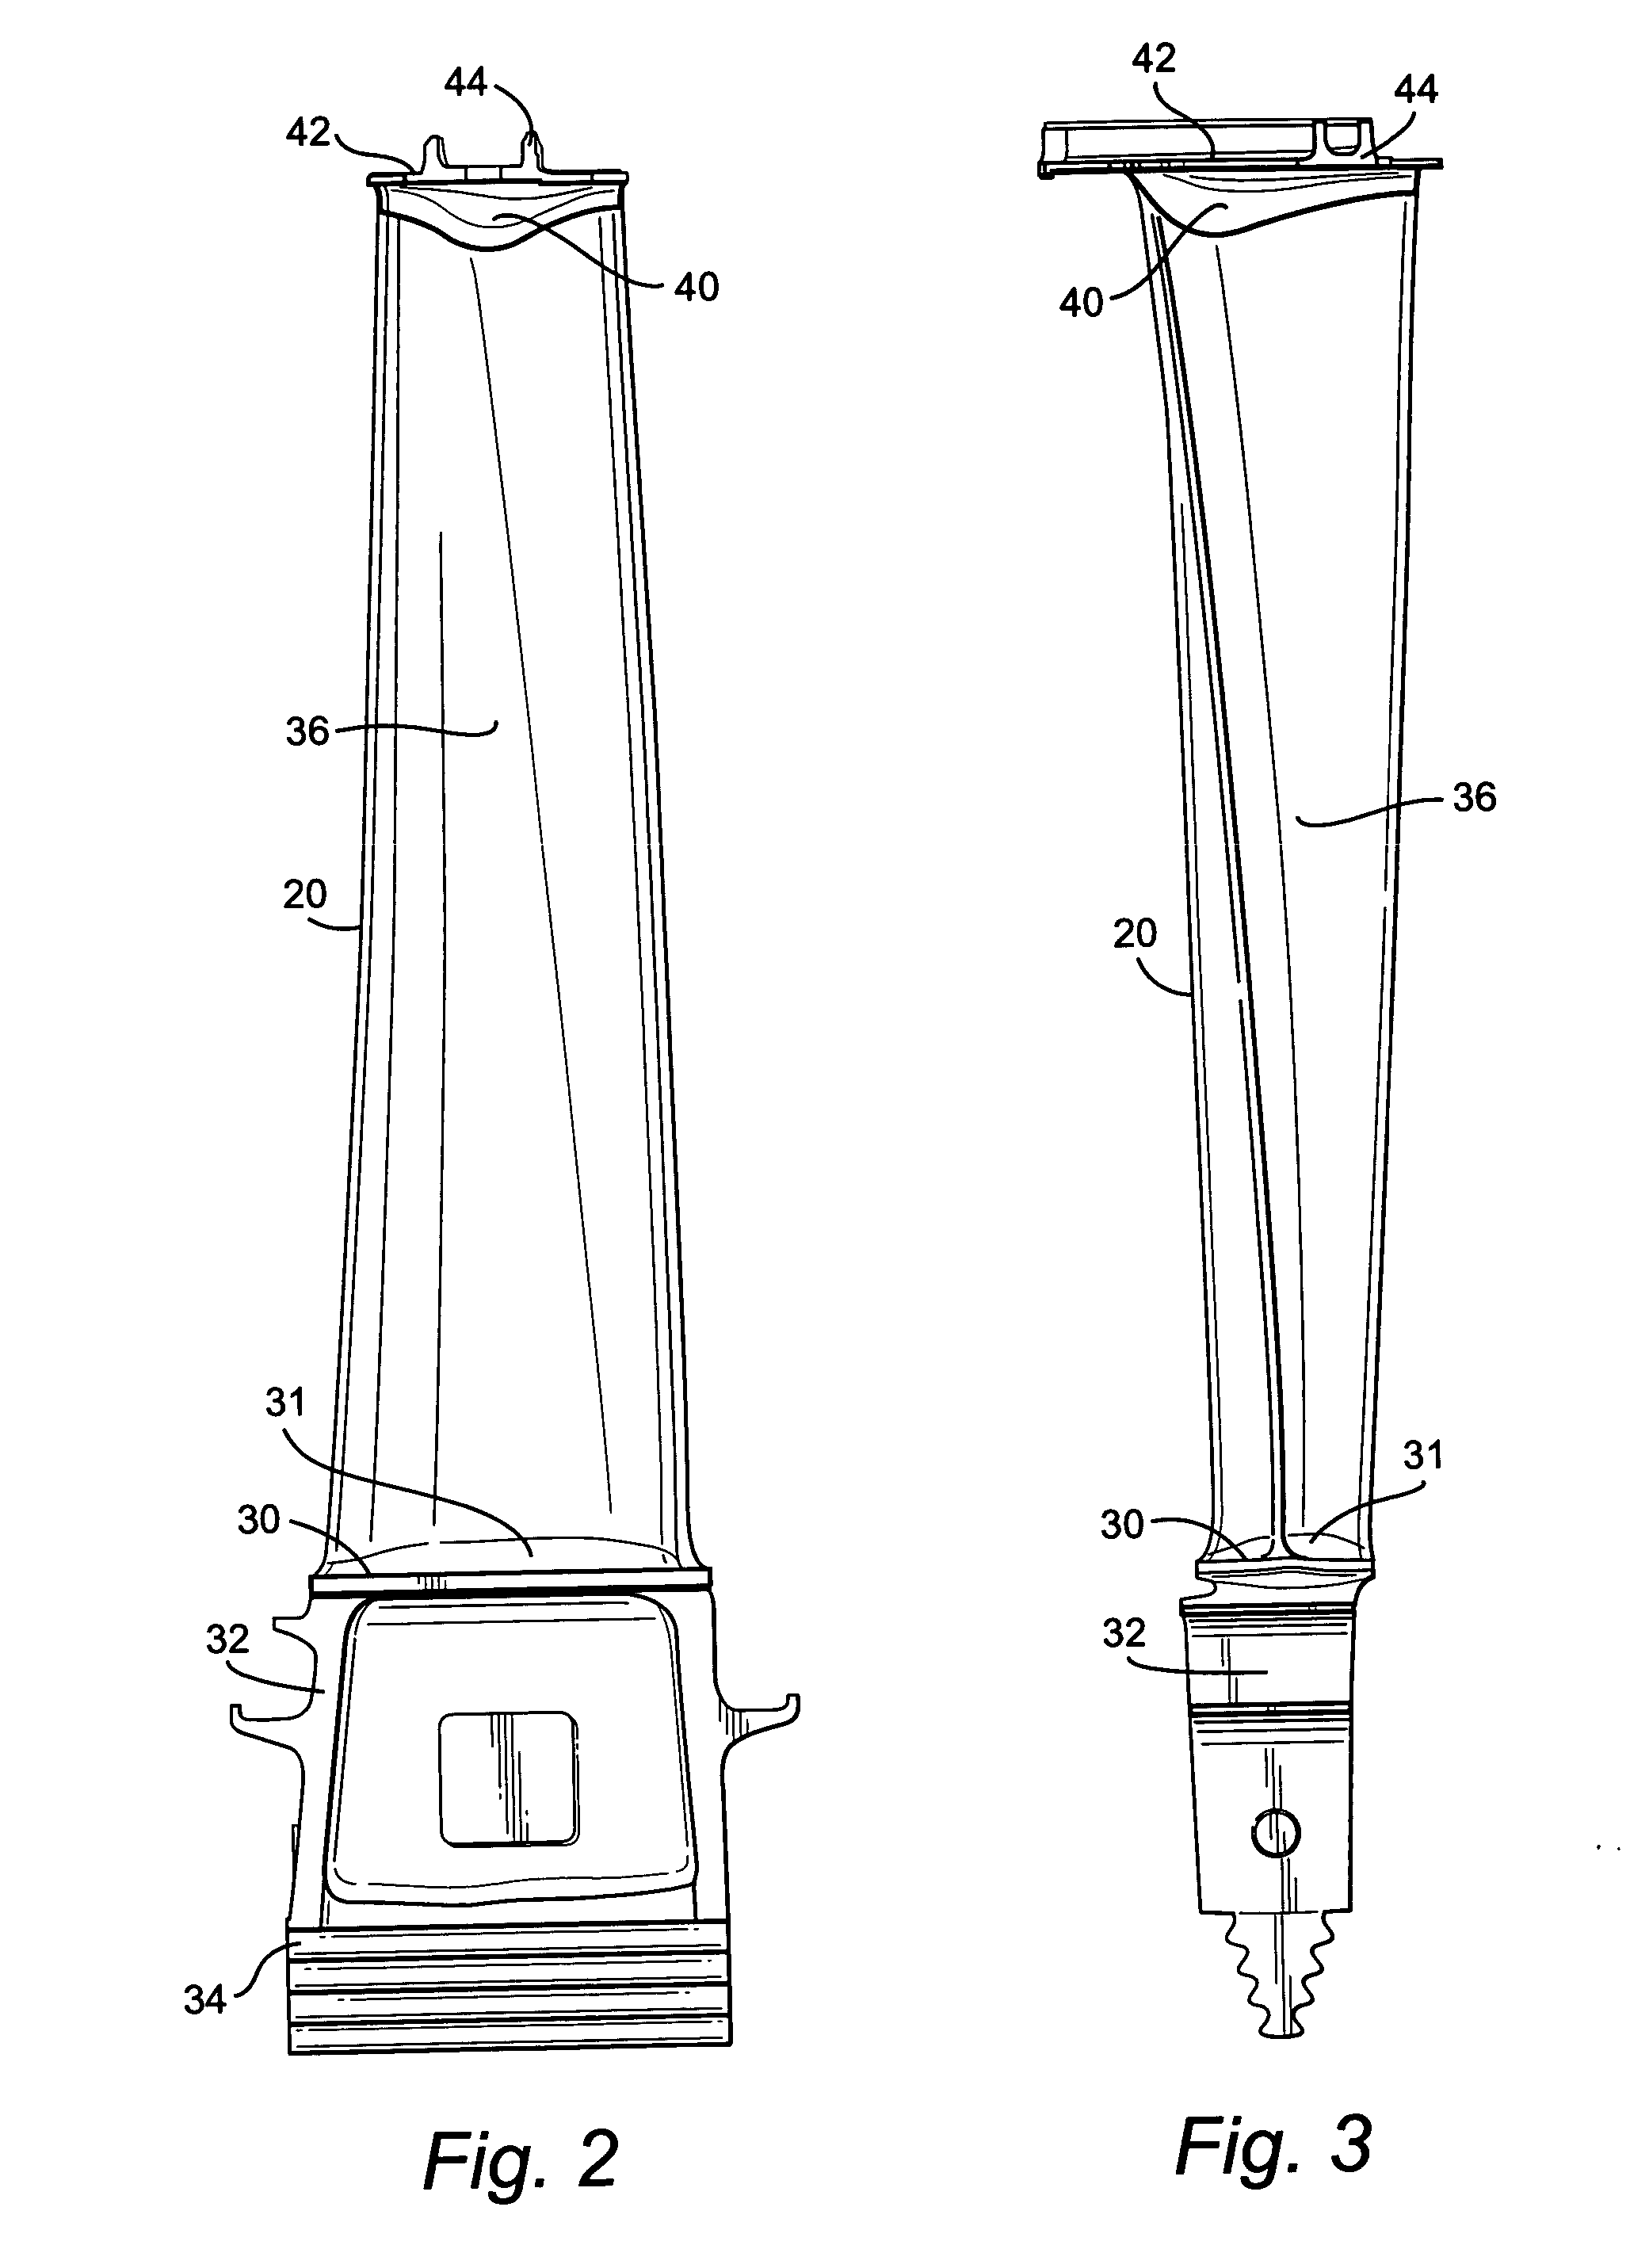 Conical tip shroud fillet for a turbine bucket